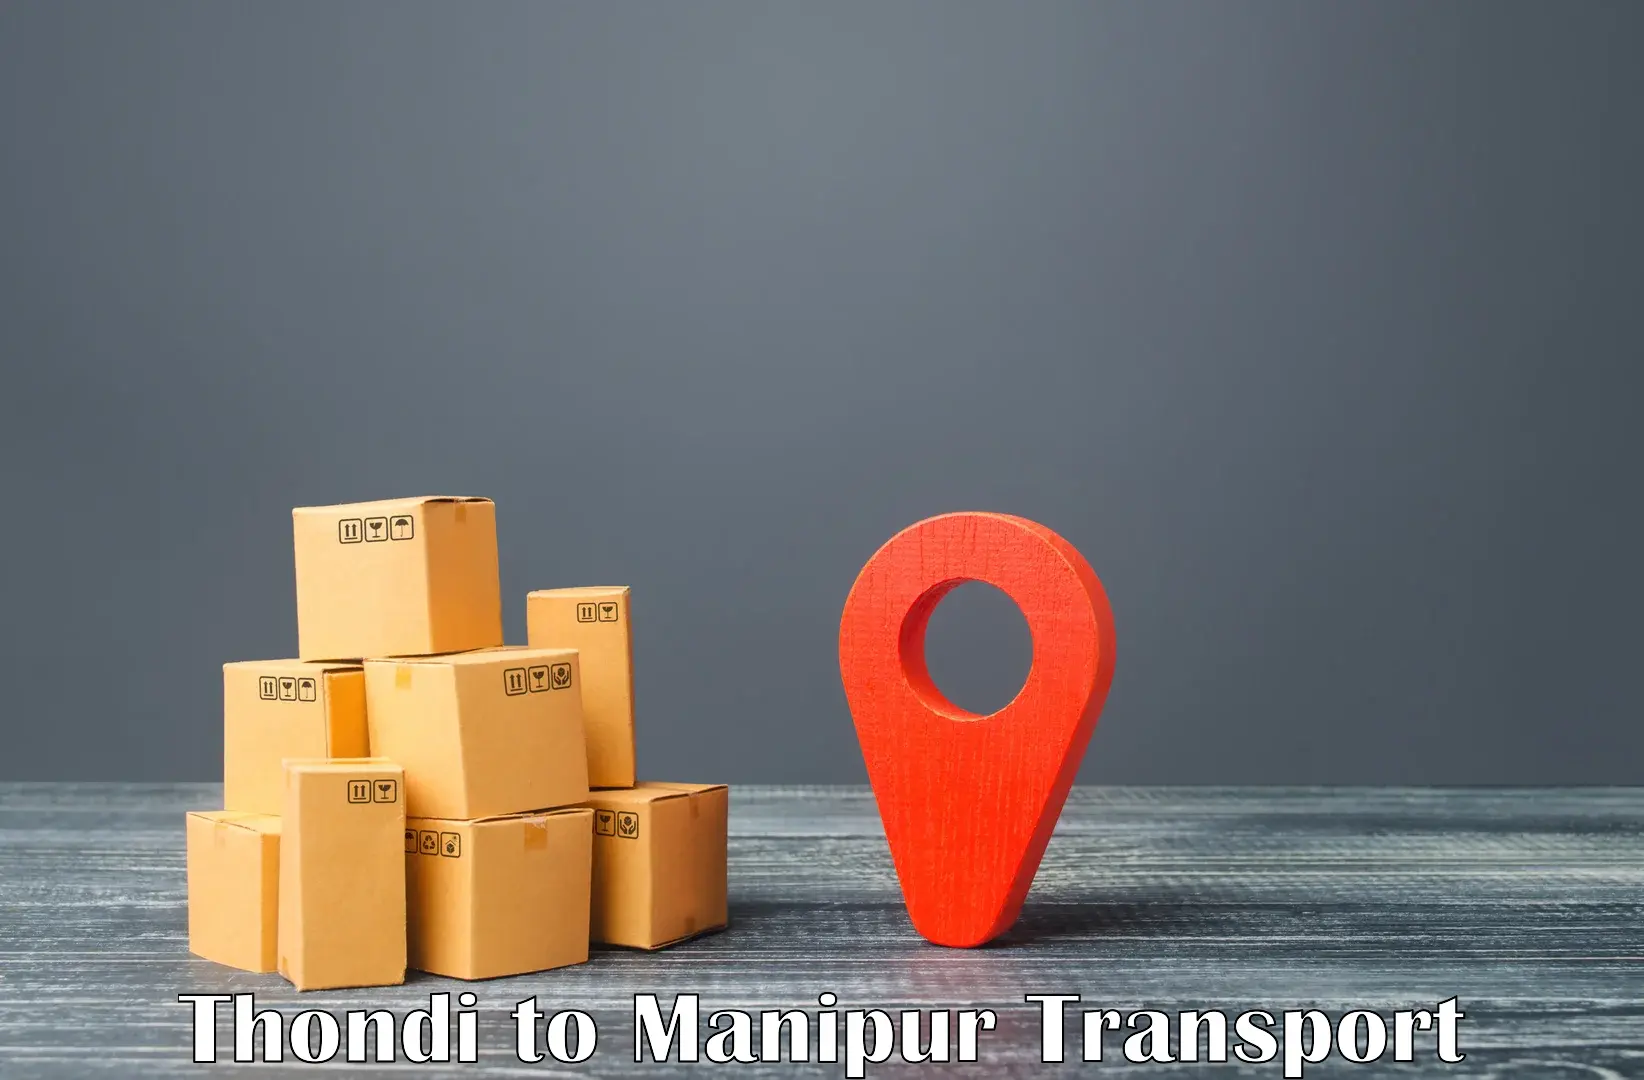 Express transport services Thondi to Imphal